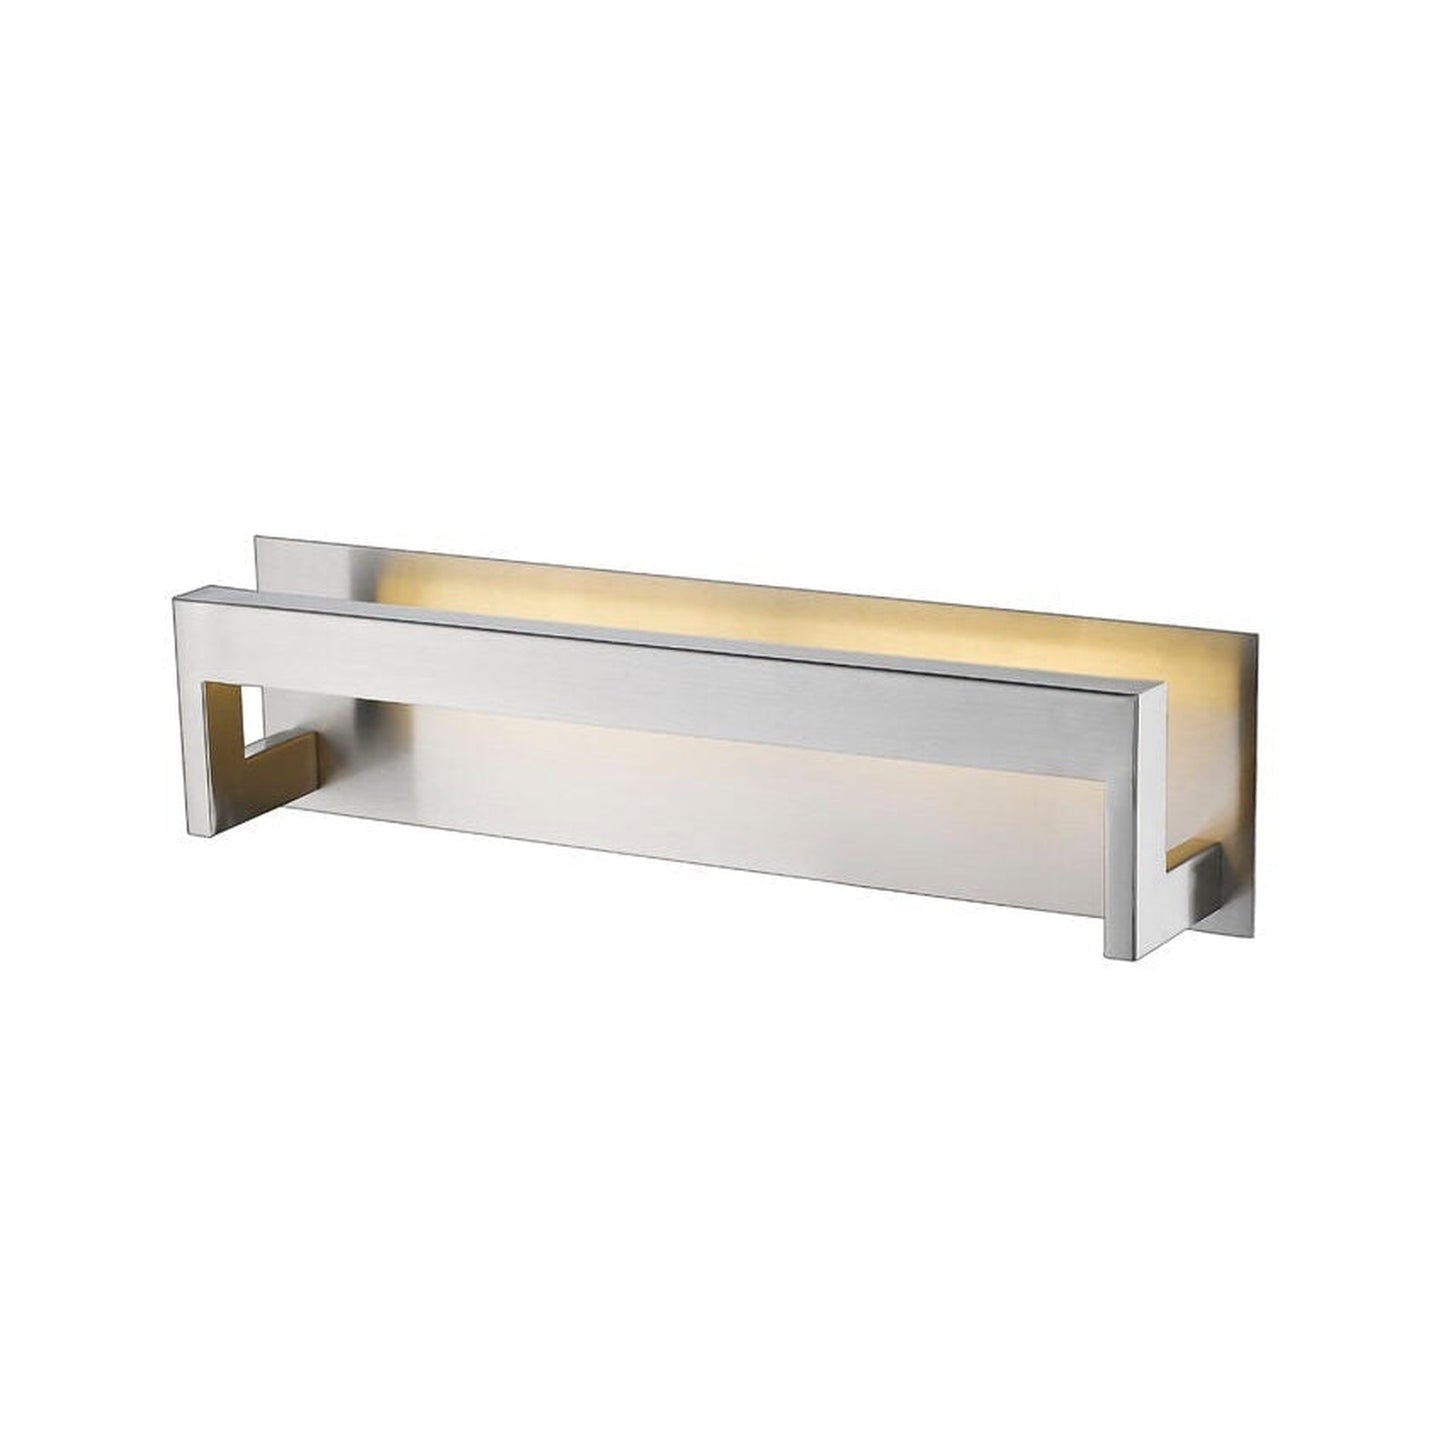 Z-Lite Linc 20" 1-Light LED Brushed Nickel Vanity Light With Frosted Acrylic Shade